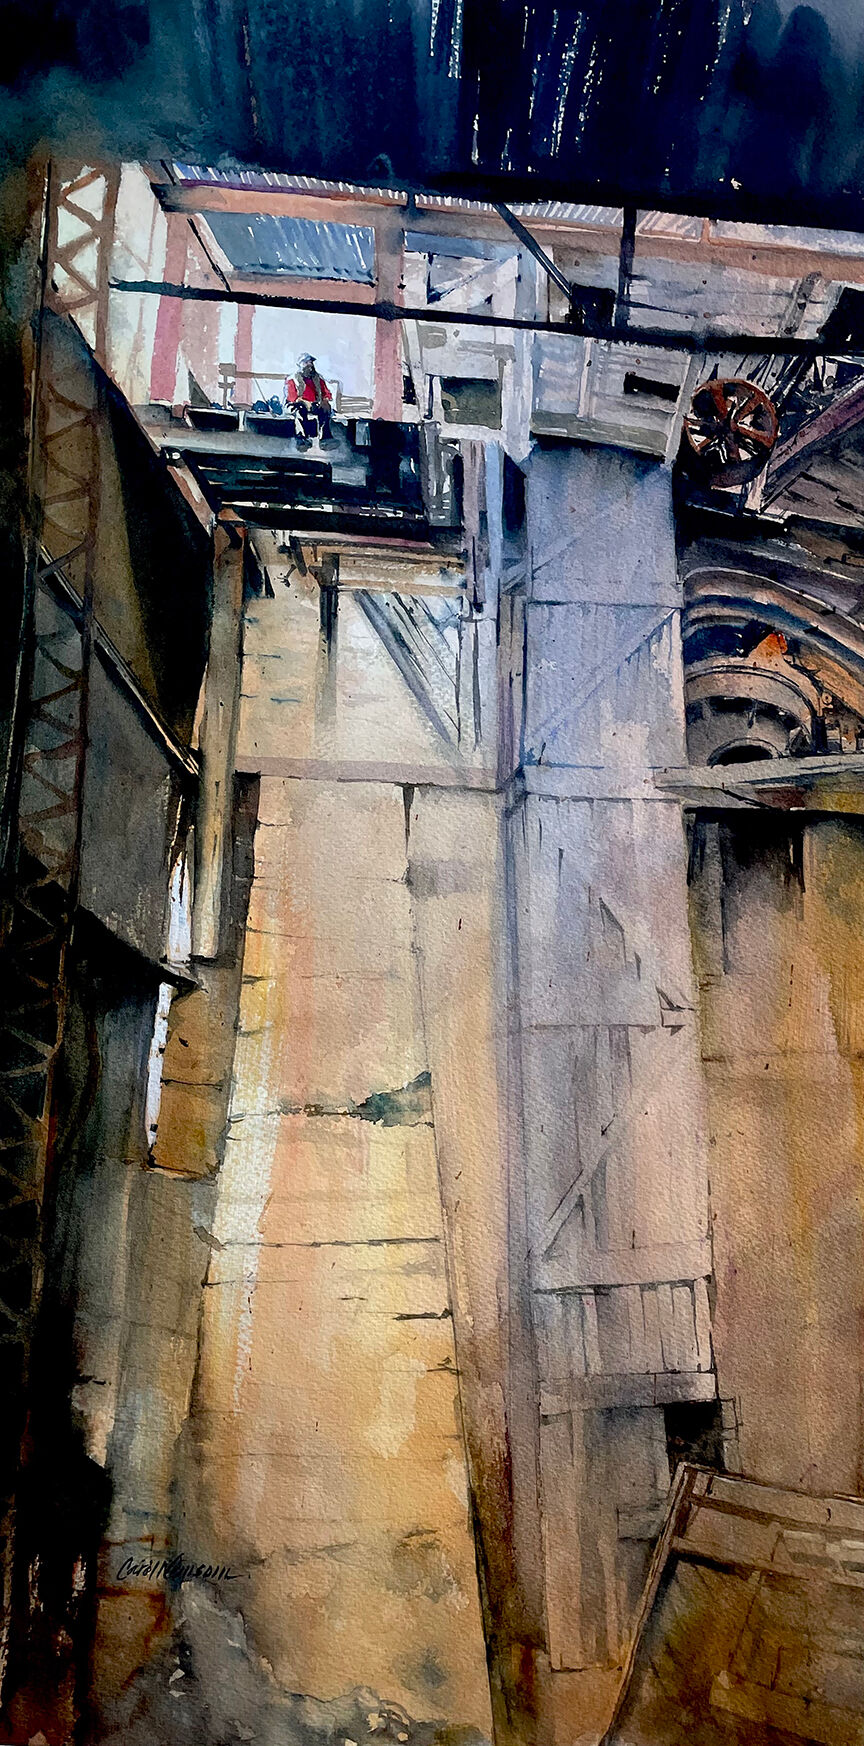 Inside the abandoned Mill, the spirits of the miners live on. Watercolor. 13x22